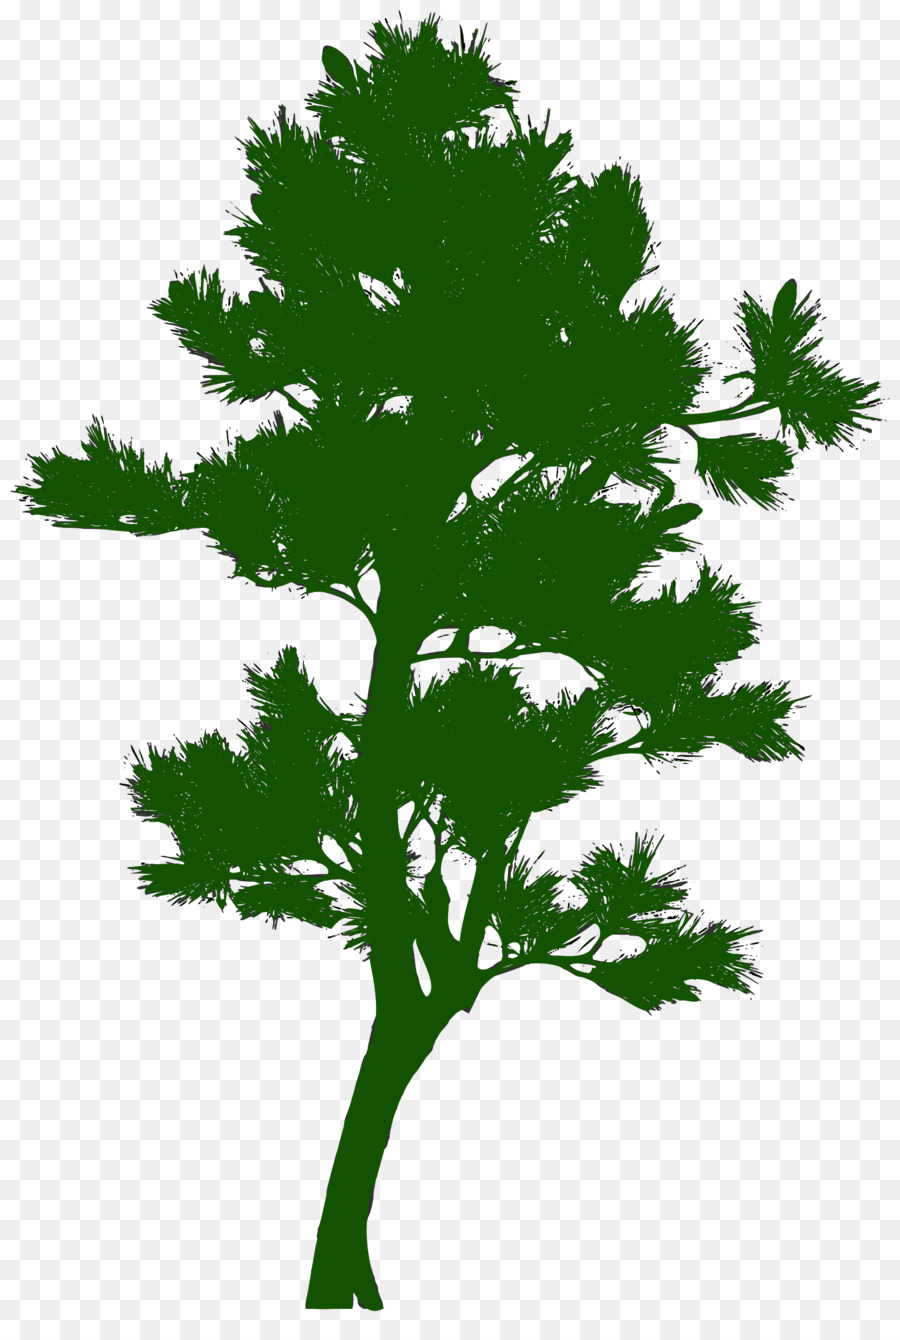 Tree Silhouette Pine - pine png download - 1635*2400 - Free Transparent Tree png Download.